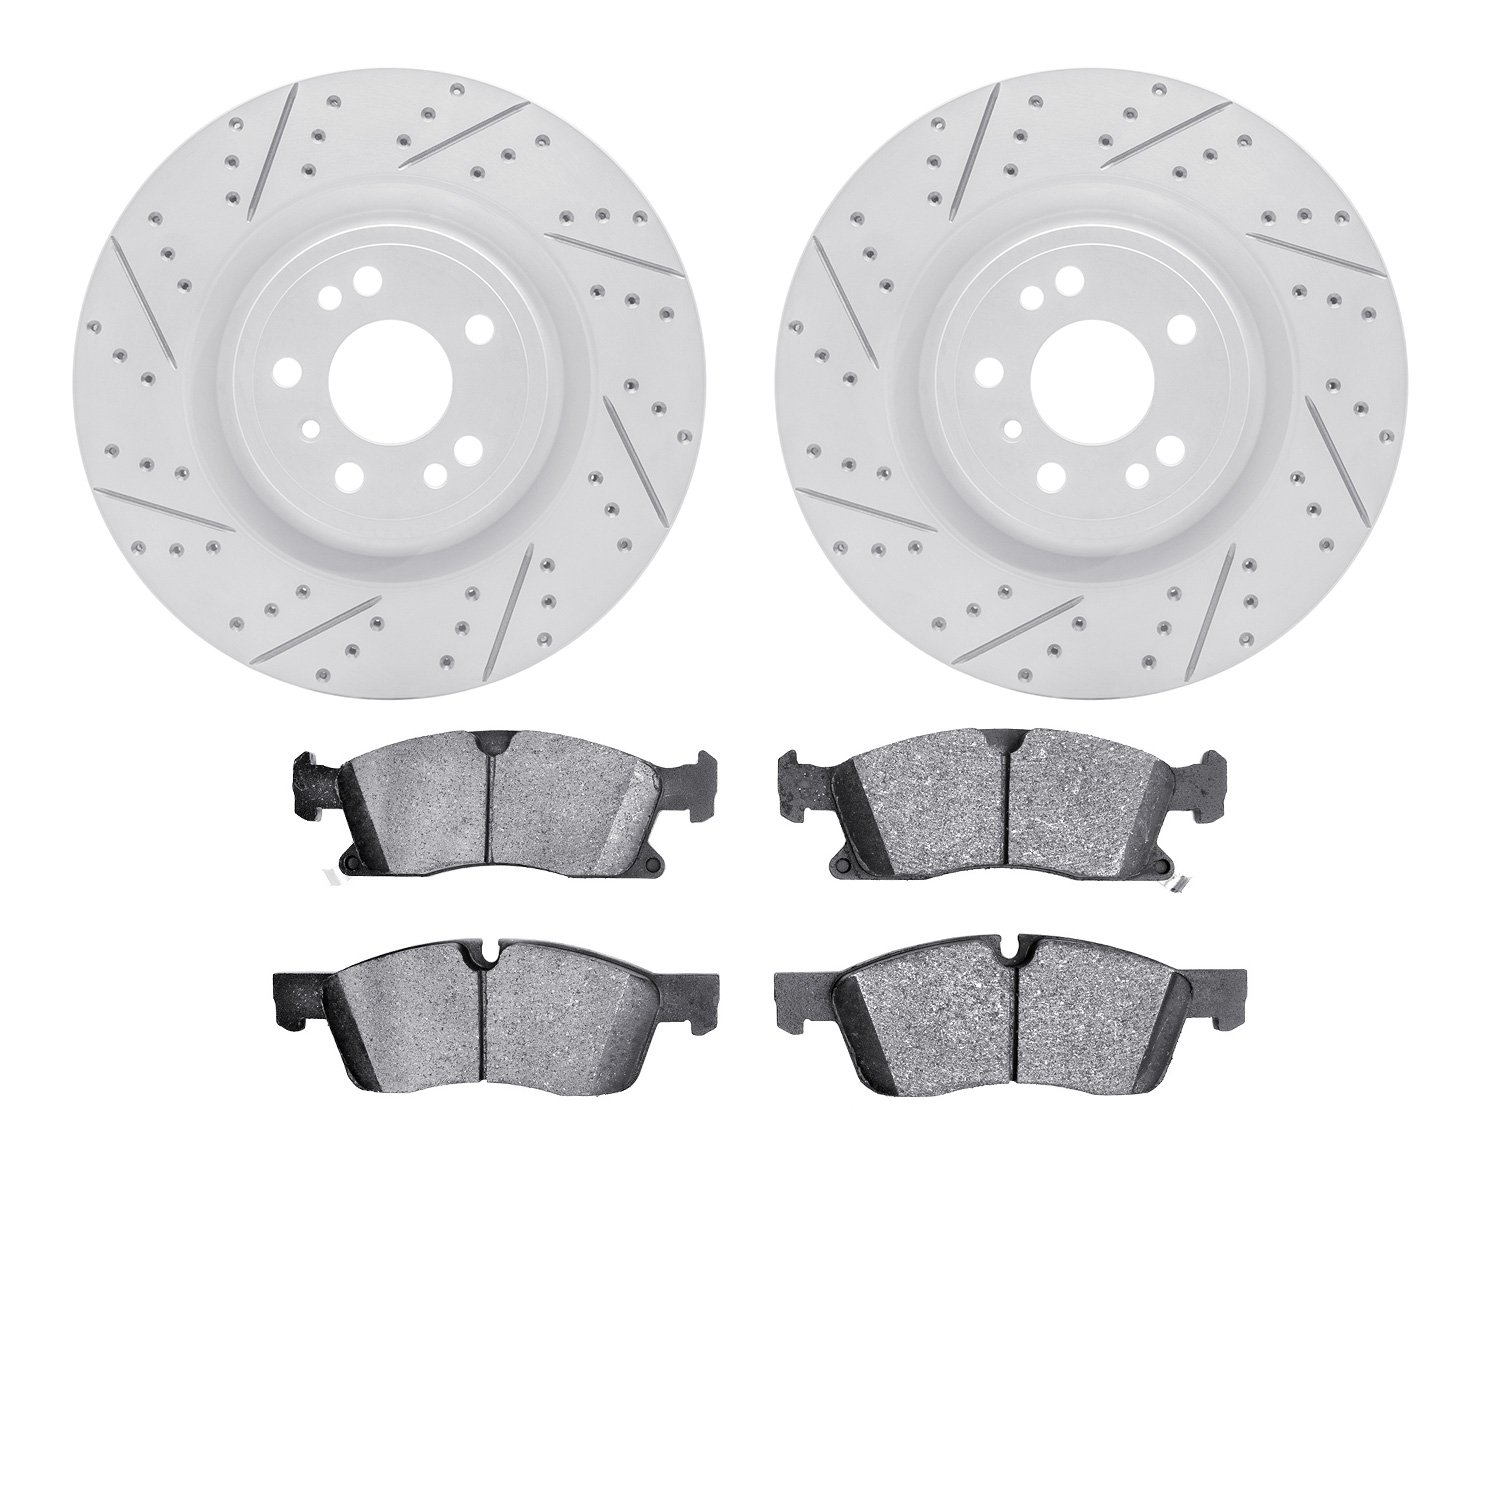 2502-63148 Geoperformance Drilled/Slotted Rotors w/5000 Advanced Brake Pads Kit, 2017-2019 Mercedes-Benz, Position: Front